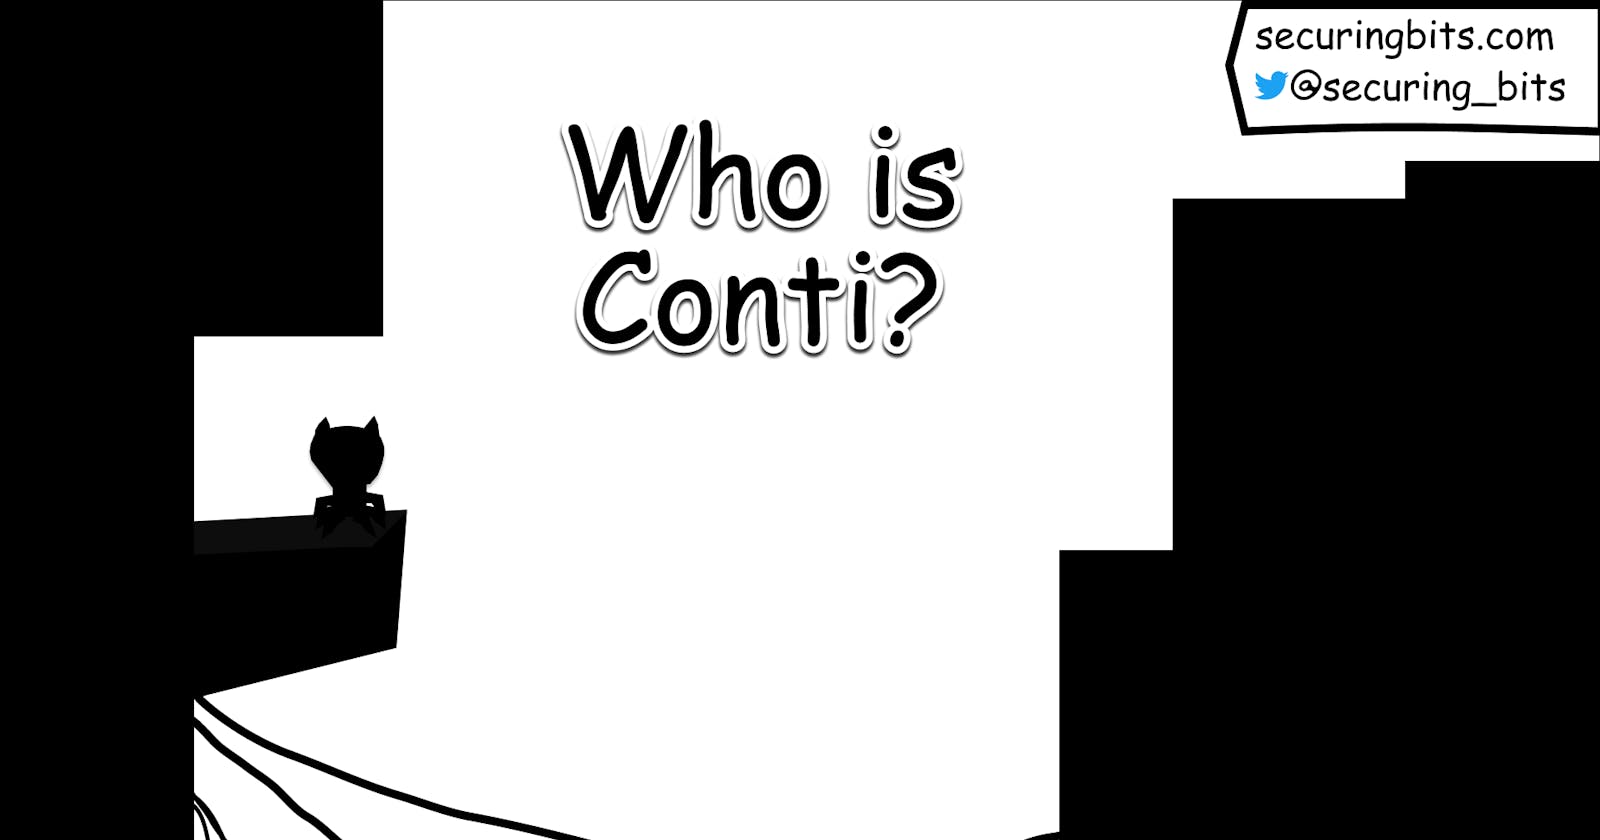 Who is Conti?